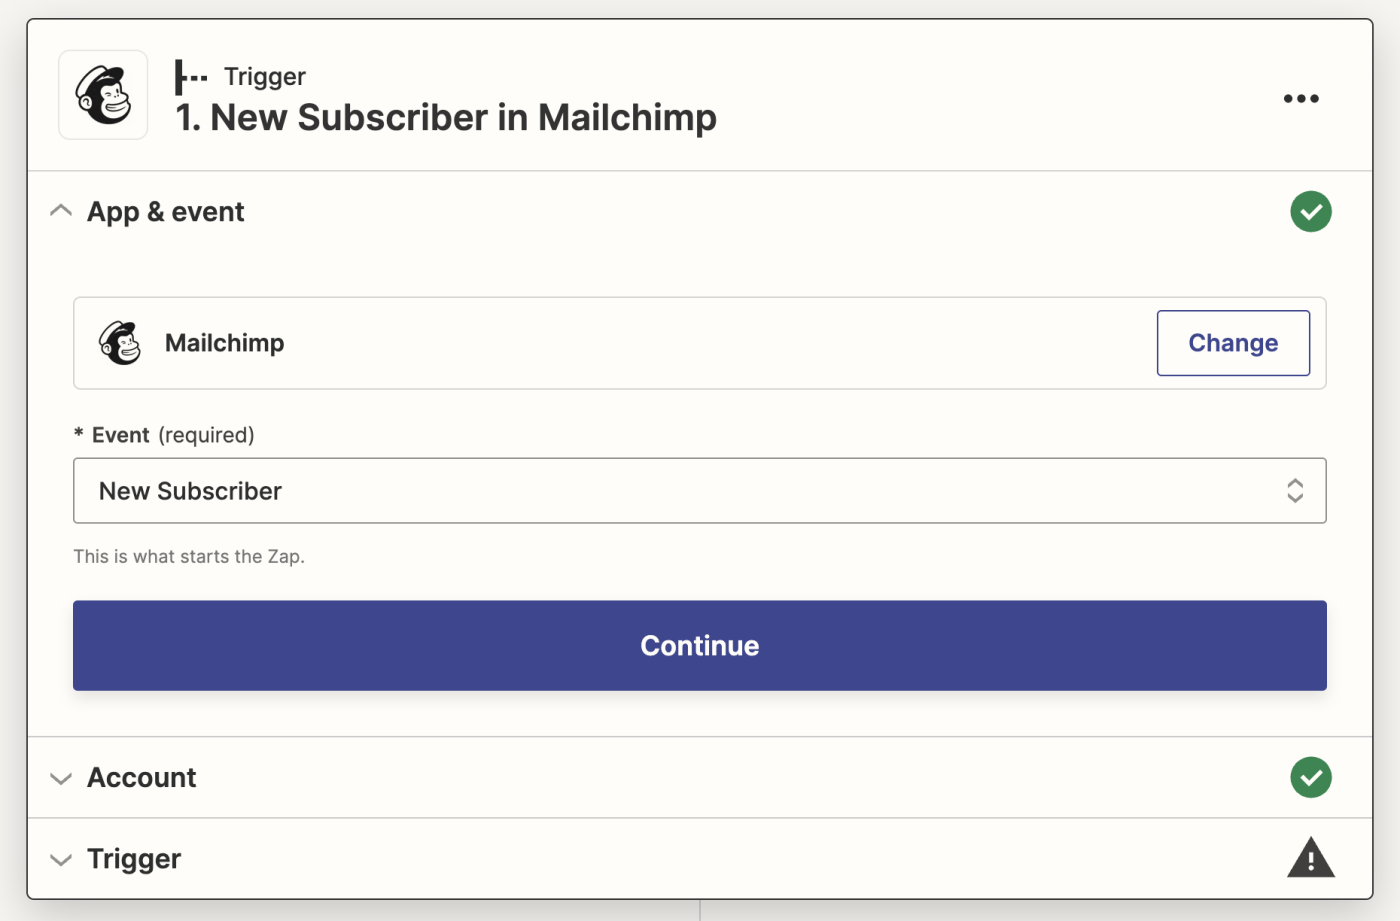 A trigger step in the Zap editor with Mailchimp selected for the trigger app and New Subscriber selected for the trigger event.